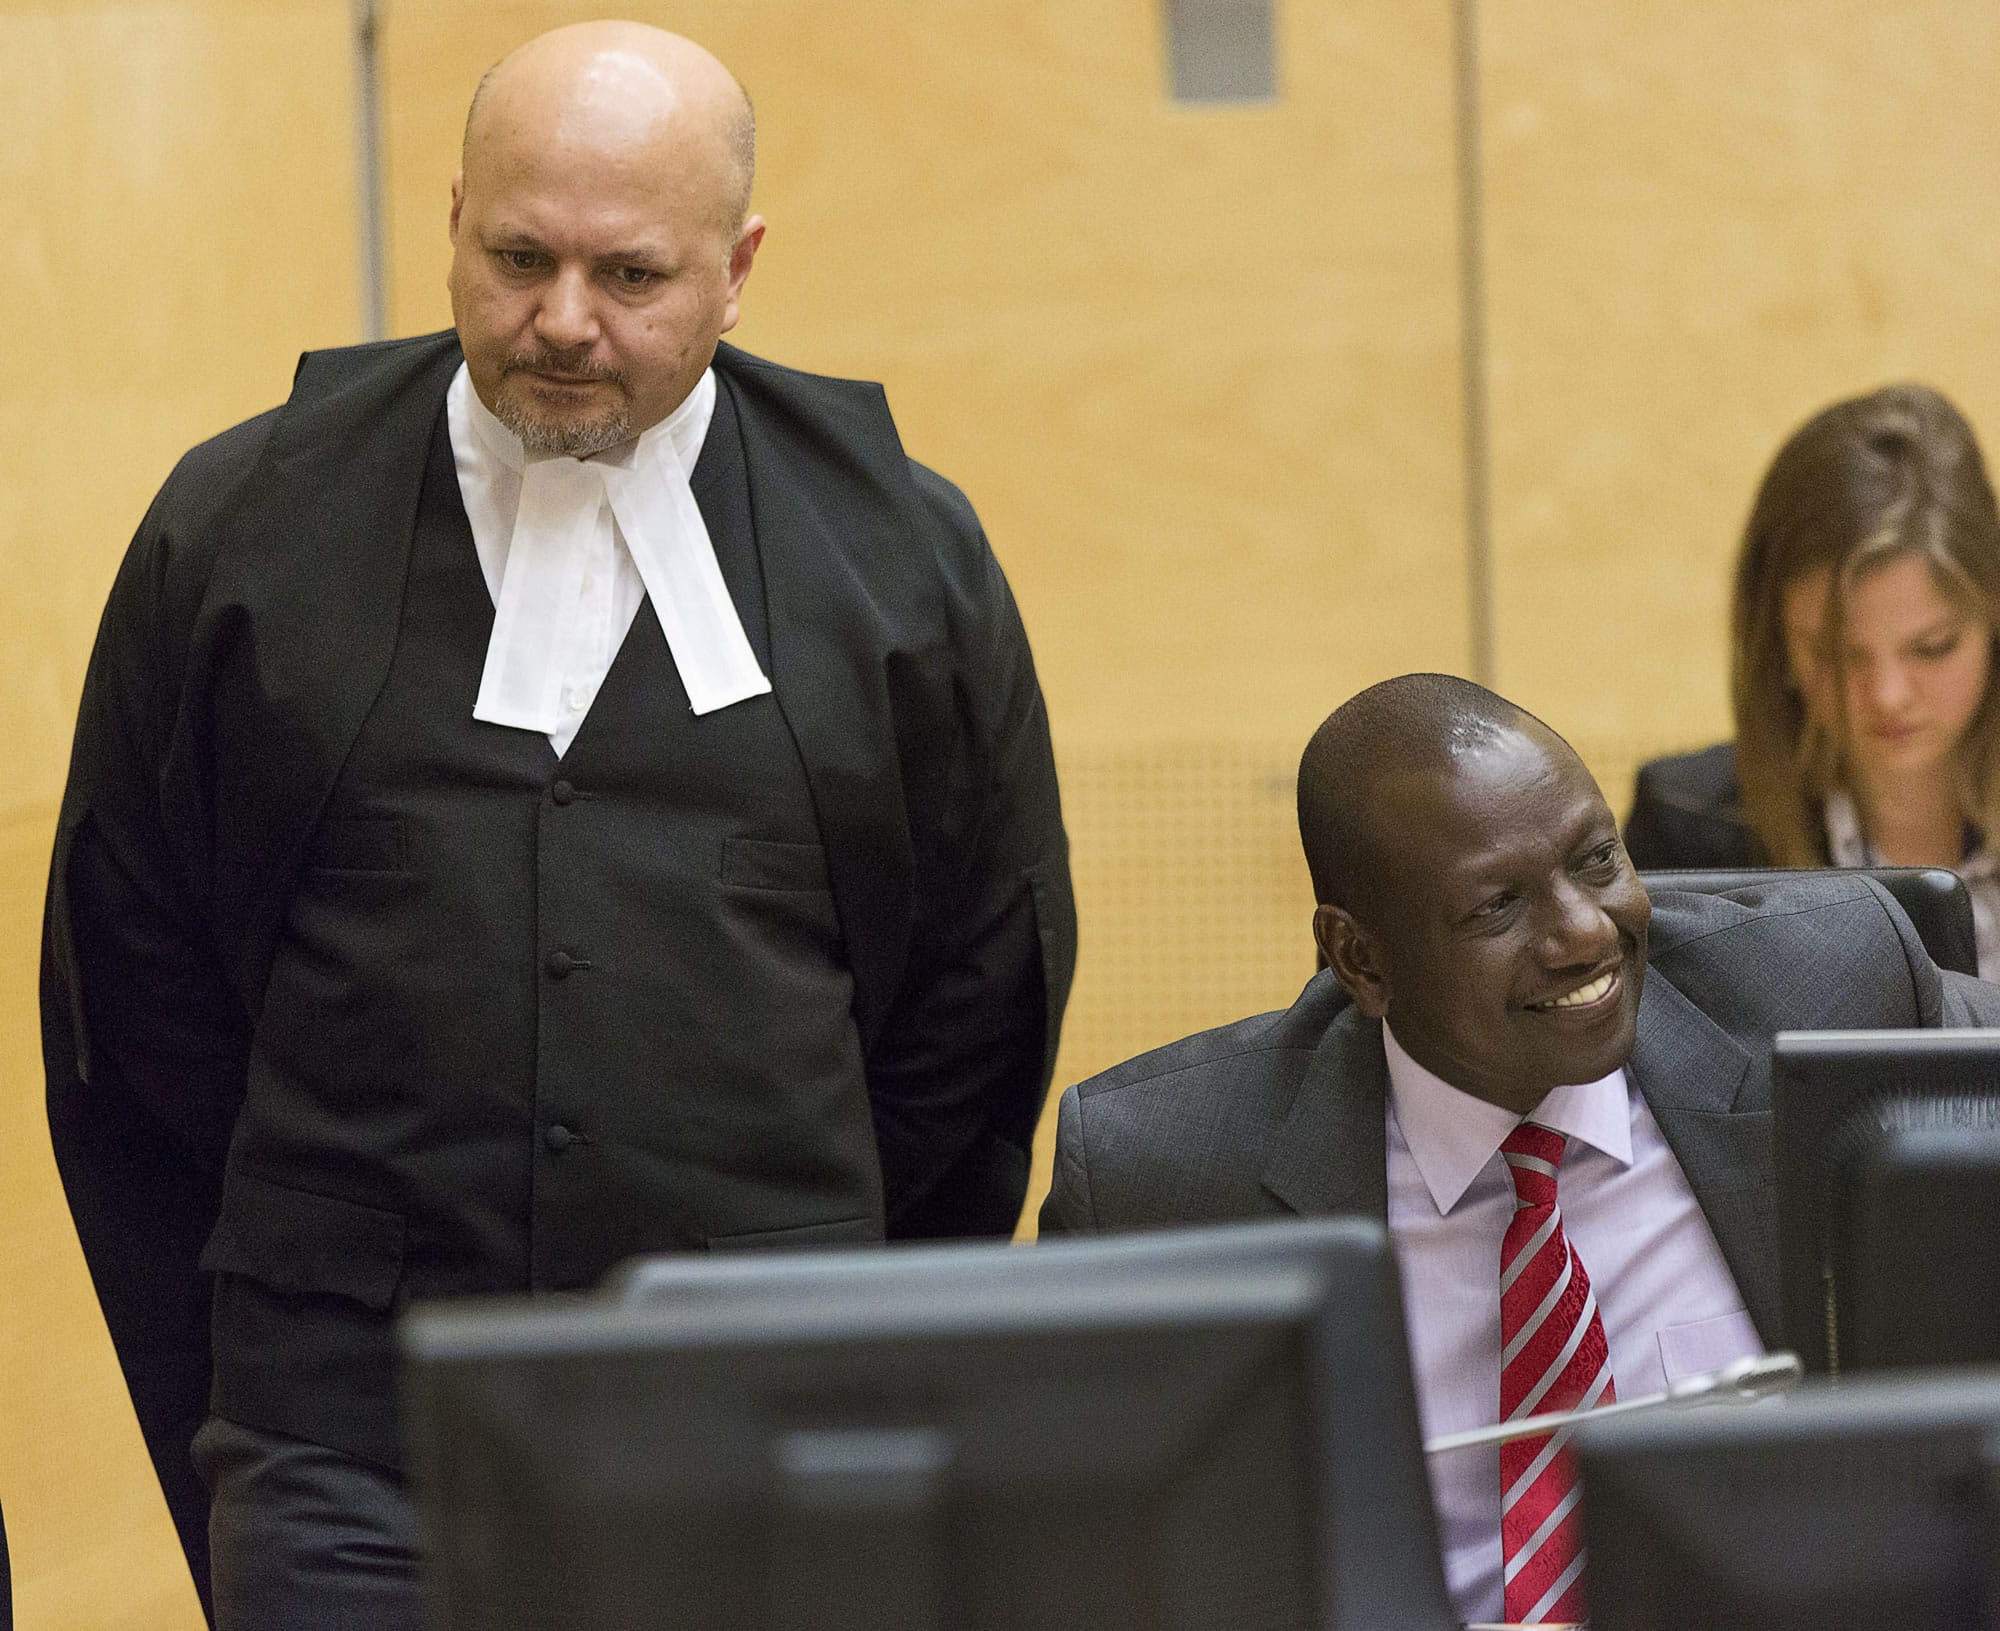 Kenya's Deputy President William Ruto, center, awaits the start of his trial in the courtroom of the International Criminal Court in The Hague, Netherlands, on Tuesday .